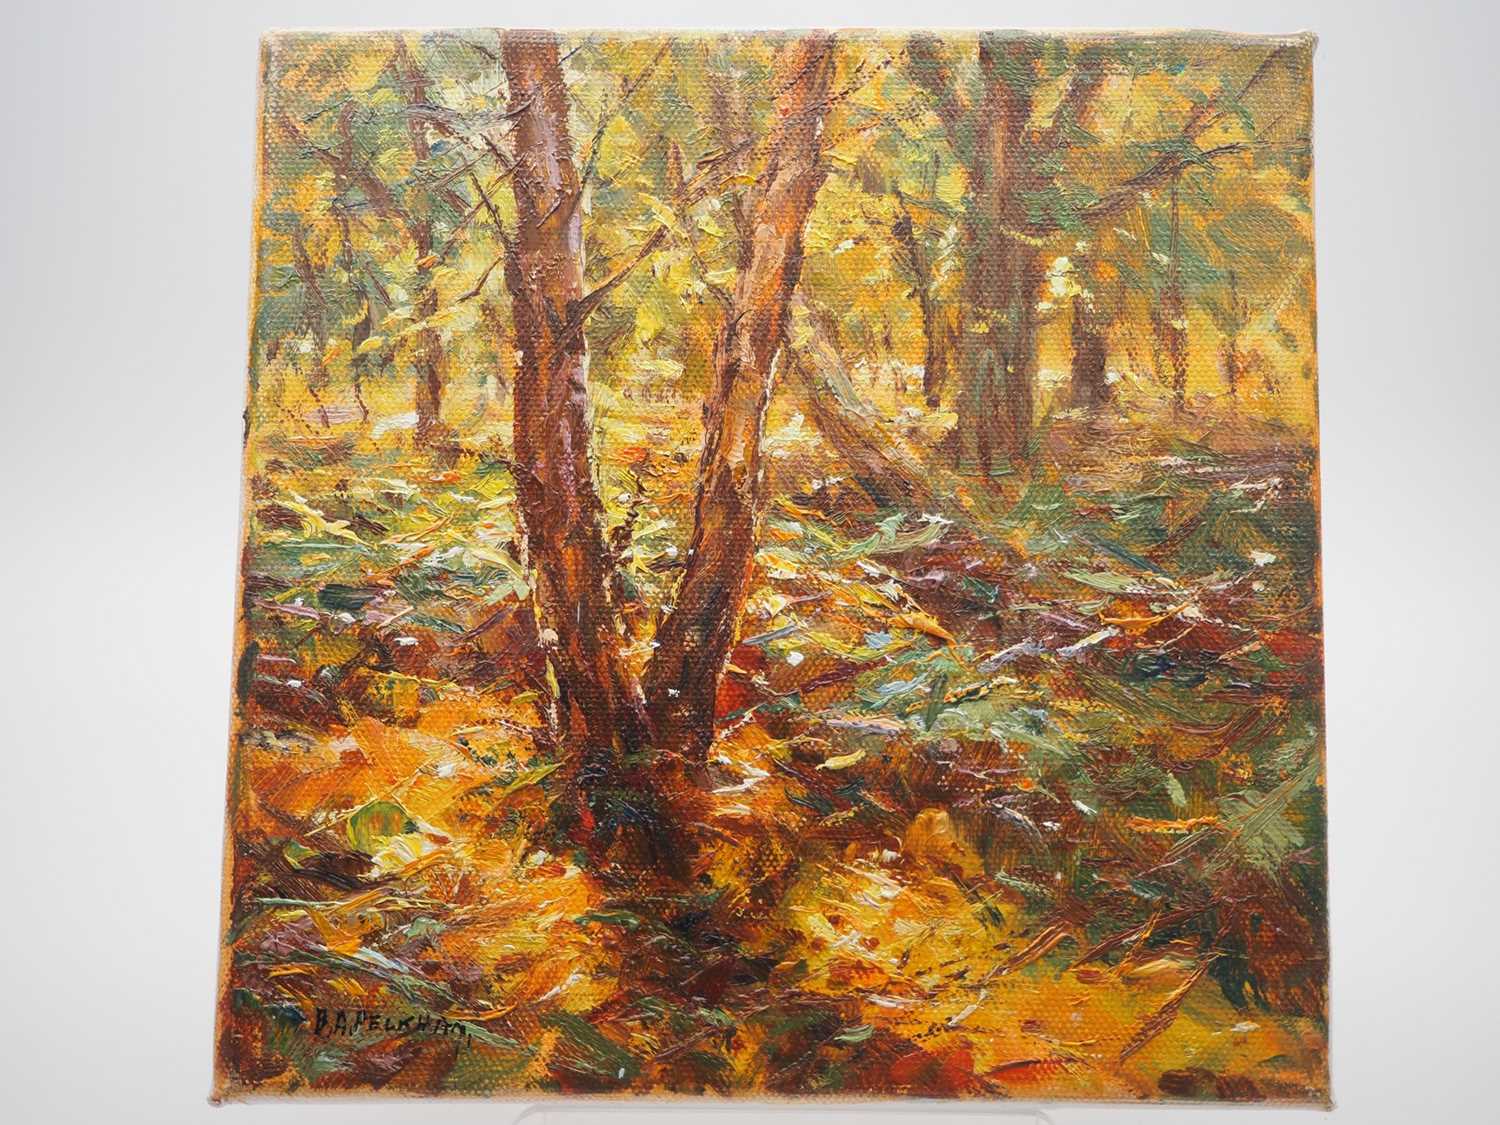 Barry Peckham 'FOREST' - oil on canvas - signed - 8" x 8" - PROVENANCE: Donated to and sold on